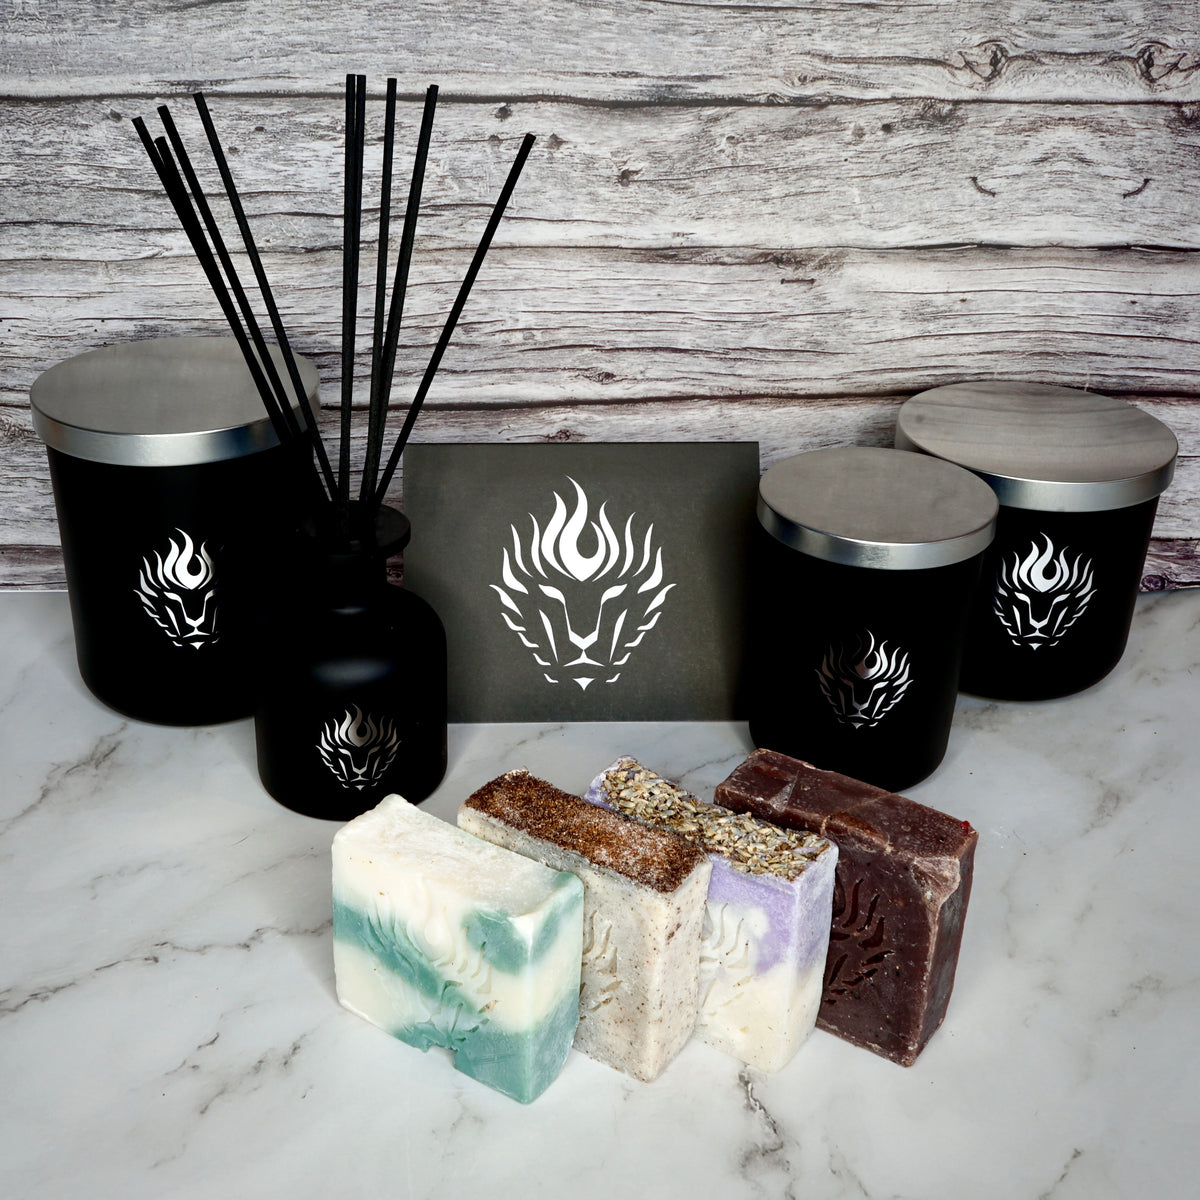 The Lion's Den Candle Company Soaps 100% Soy Candles, Reed Diffusers, Wax Melts Gift Cards, Note Cards